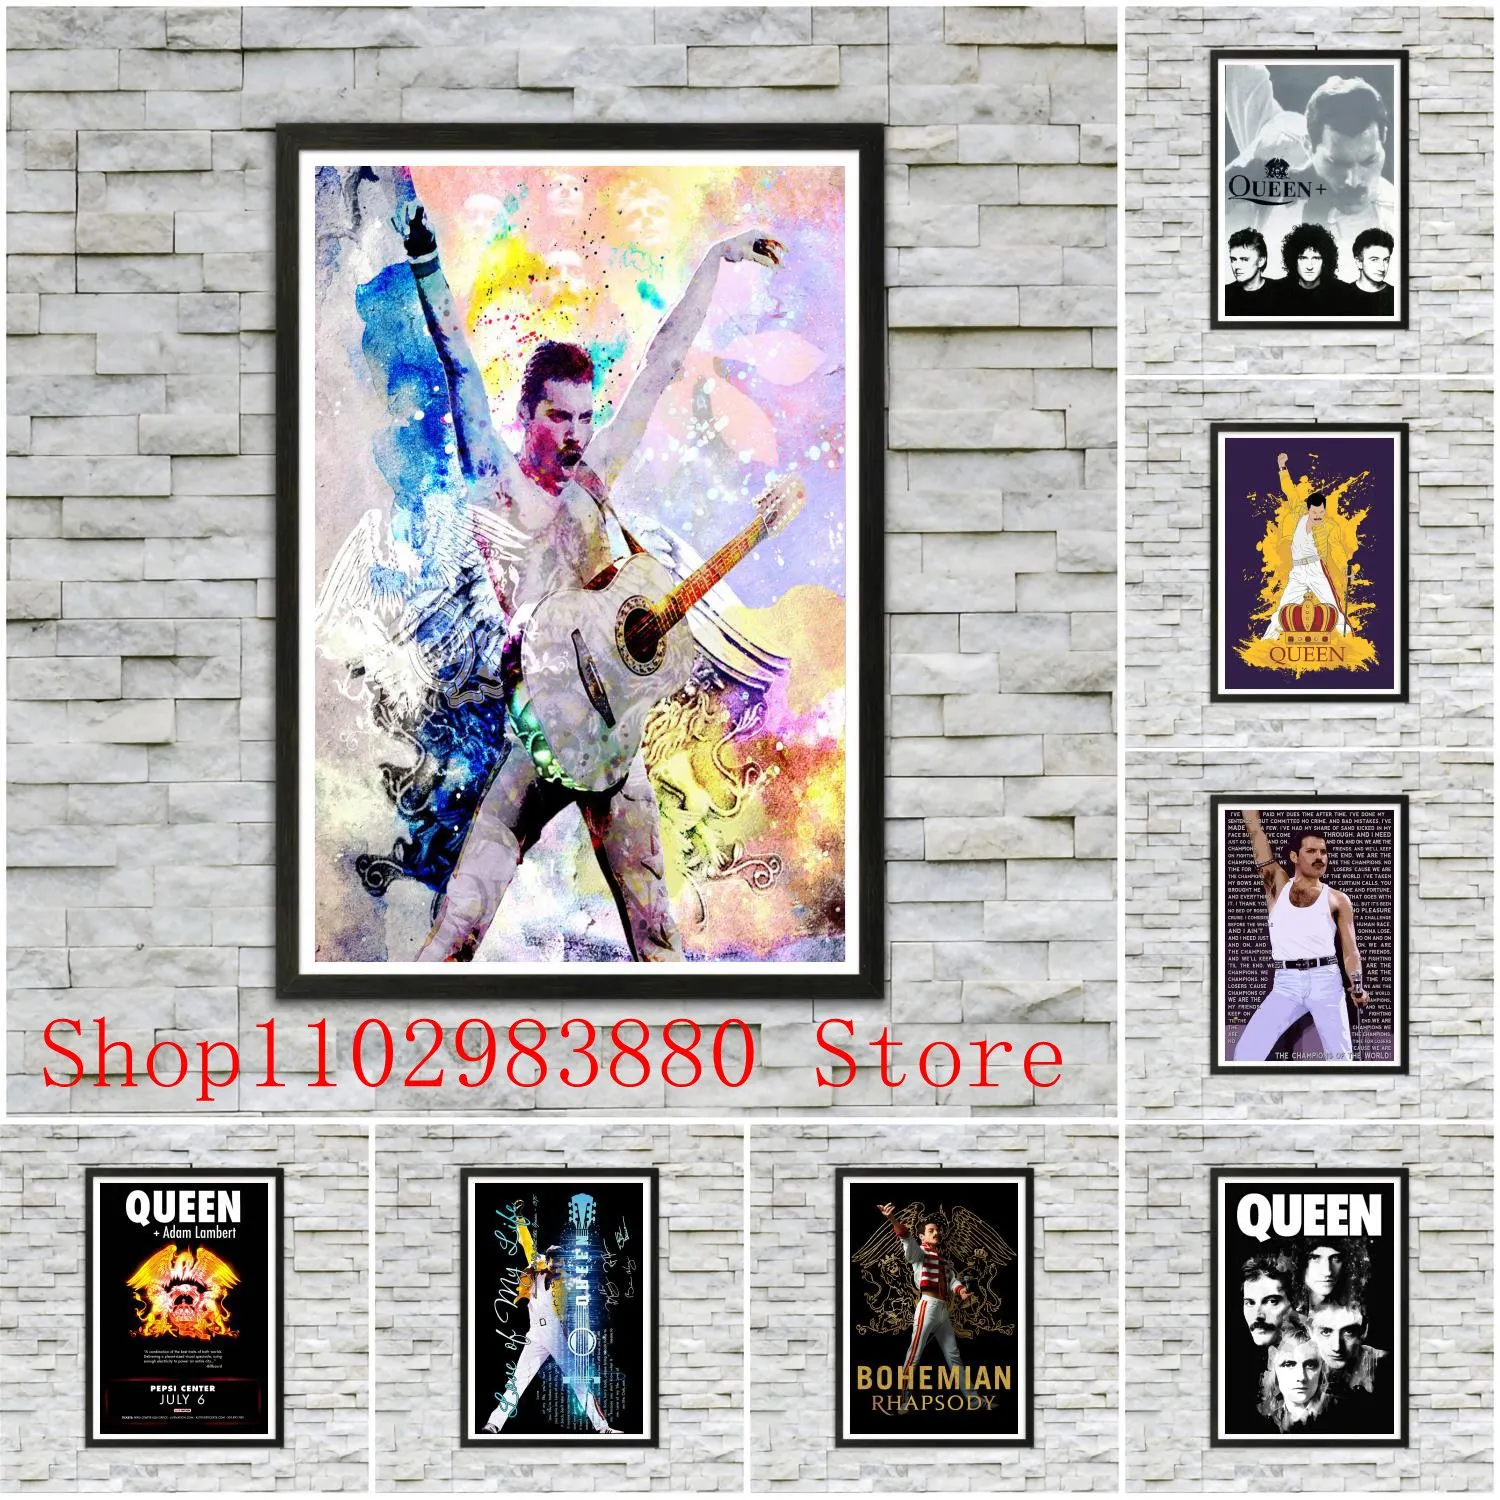 

Freddie Mercury Queen Poster Canvas Painting Posters and Prints Wall Art Picture Home Living Room Decor